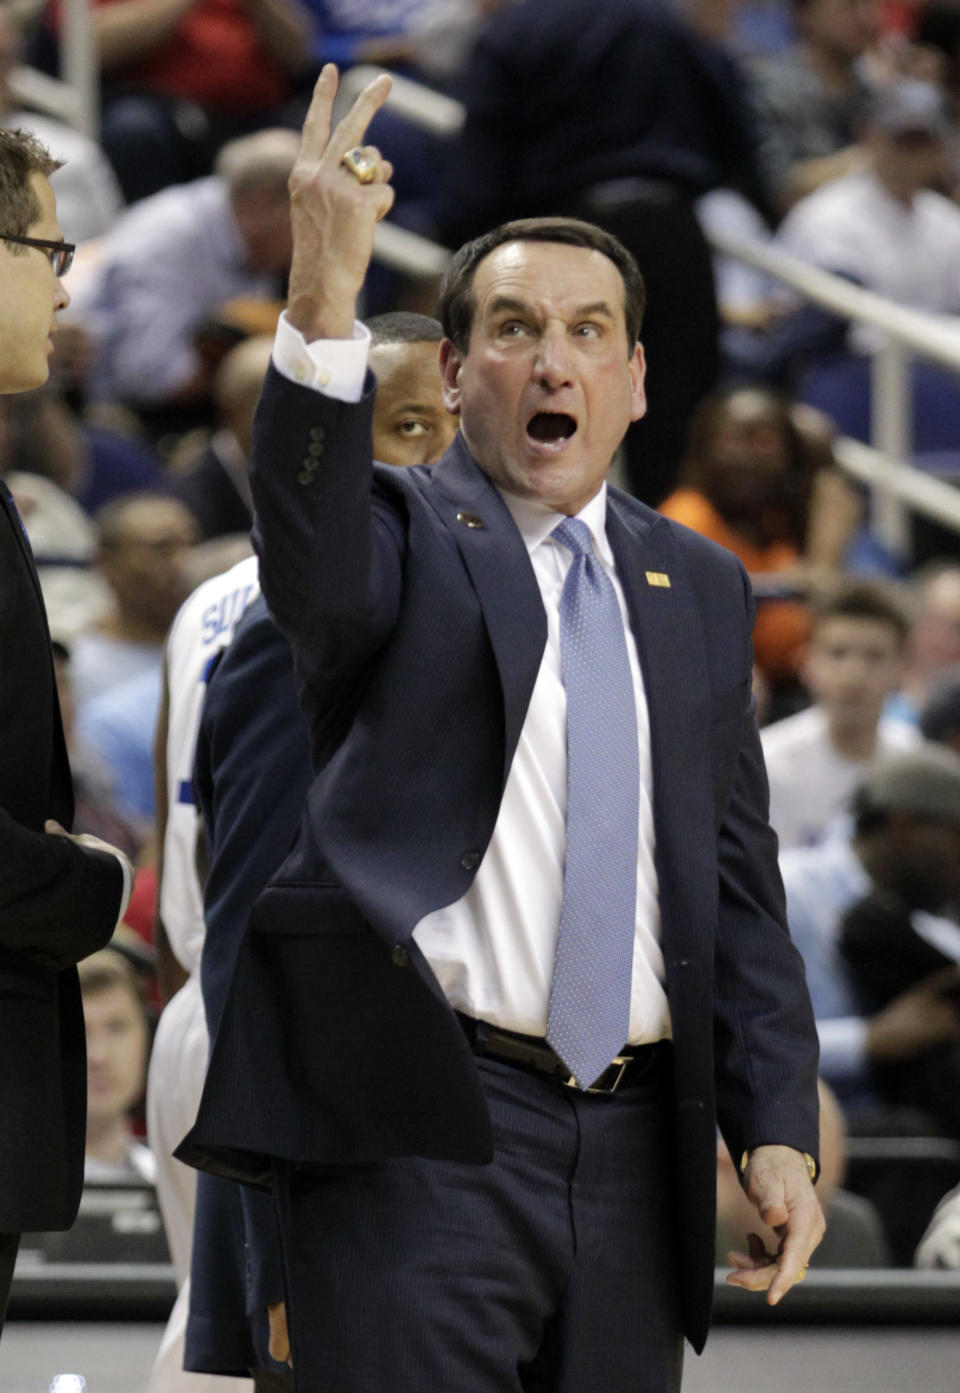 Duke head coach Mike Krzyzewski reacts to a call at the end of the first half of a quarterfinal NCAA college basketball game against Clemson at the Atlantic Coast Conference tournament in Greensboro, N.C., Friday, March 14, 2014. (AP Photo/Bob Leverone)